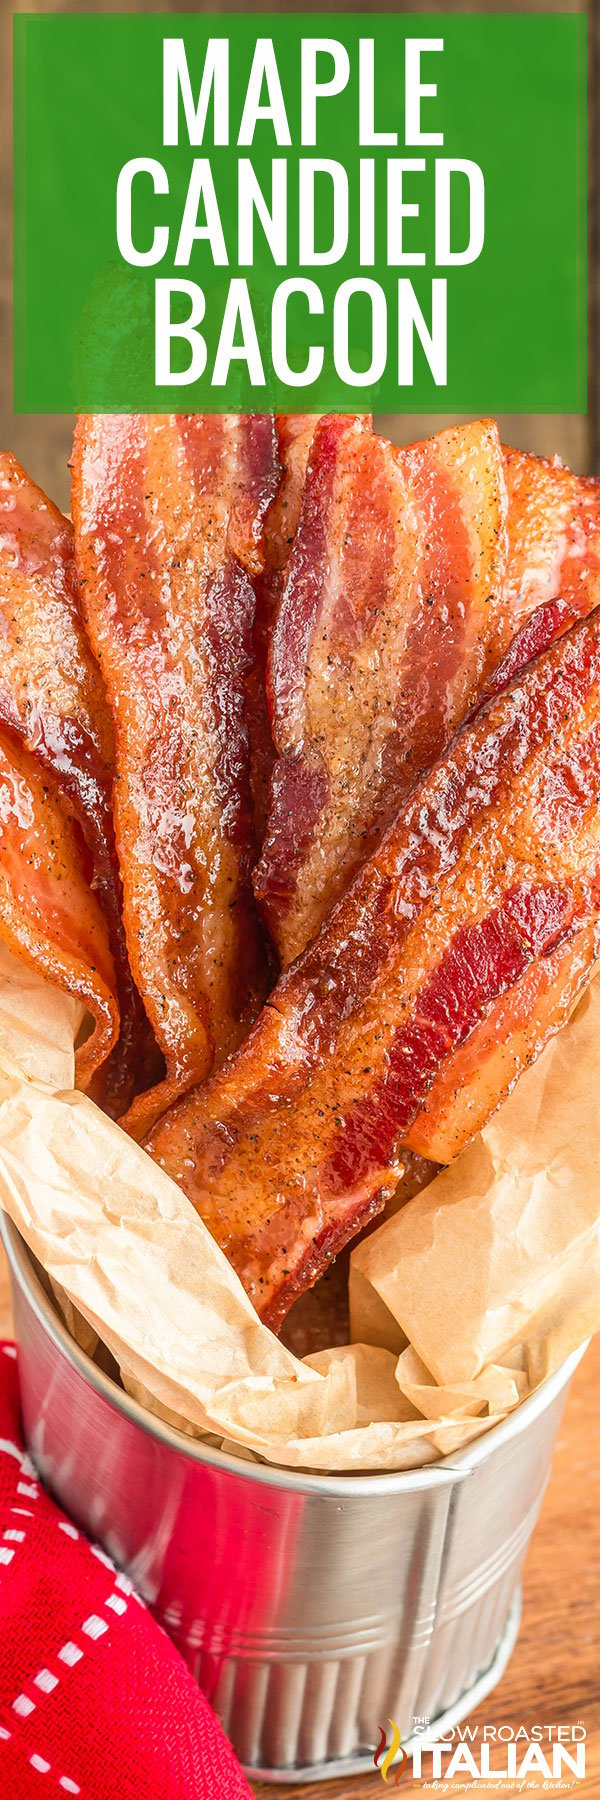 Maple Candied Bacon - PIN